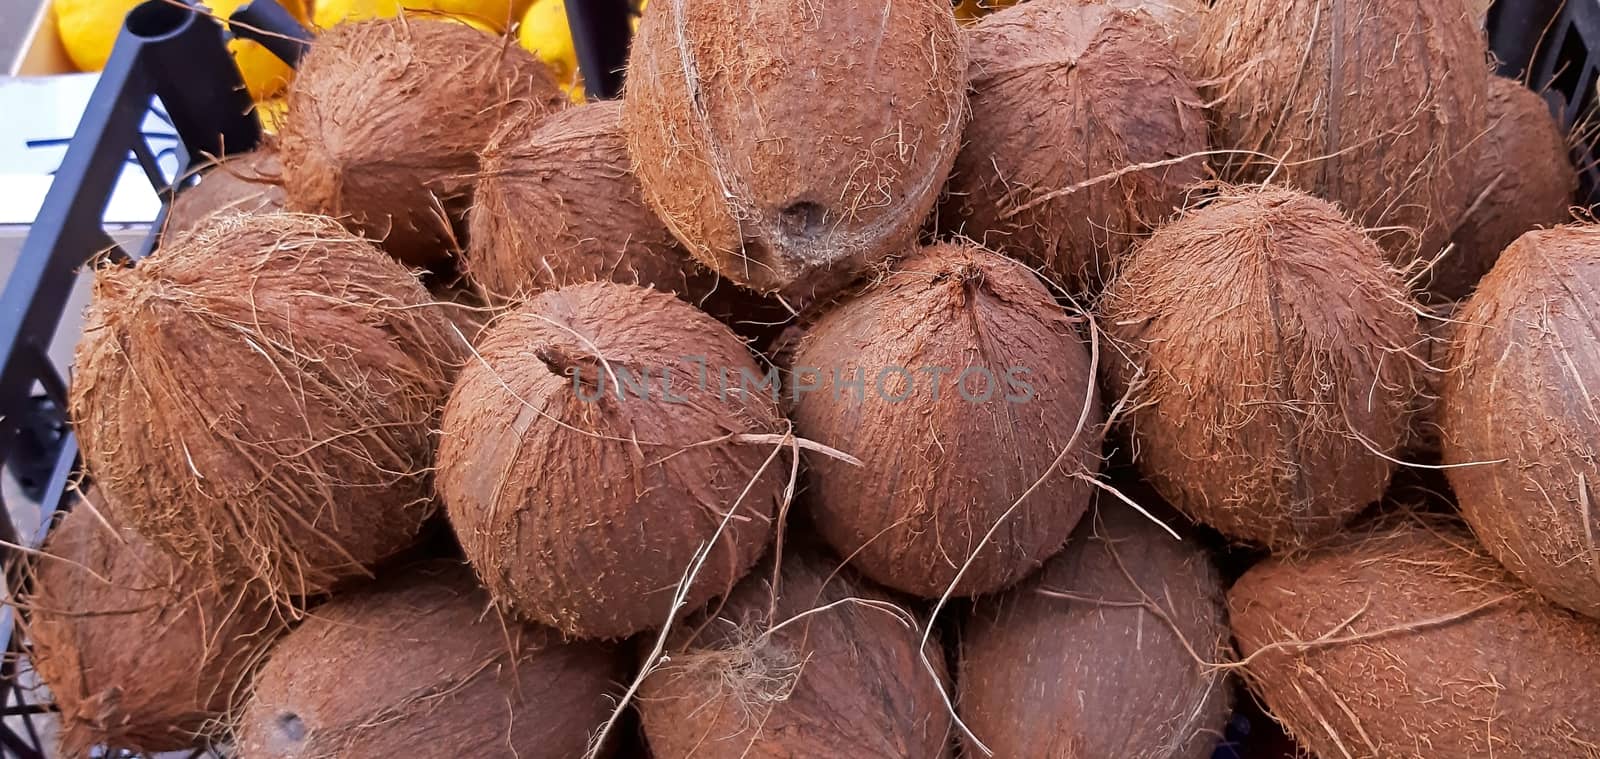 Some brown coconuts on sale textured close up. by Mindru